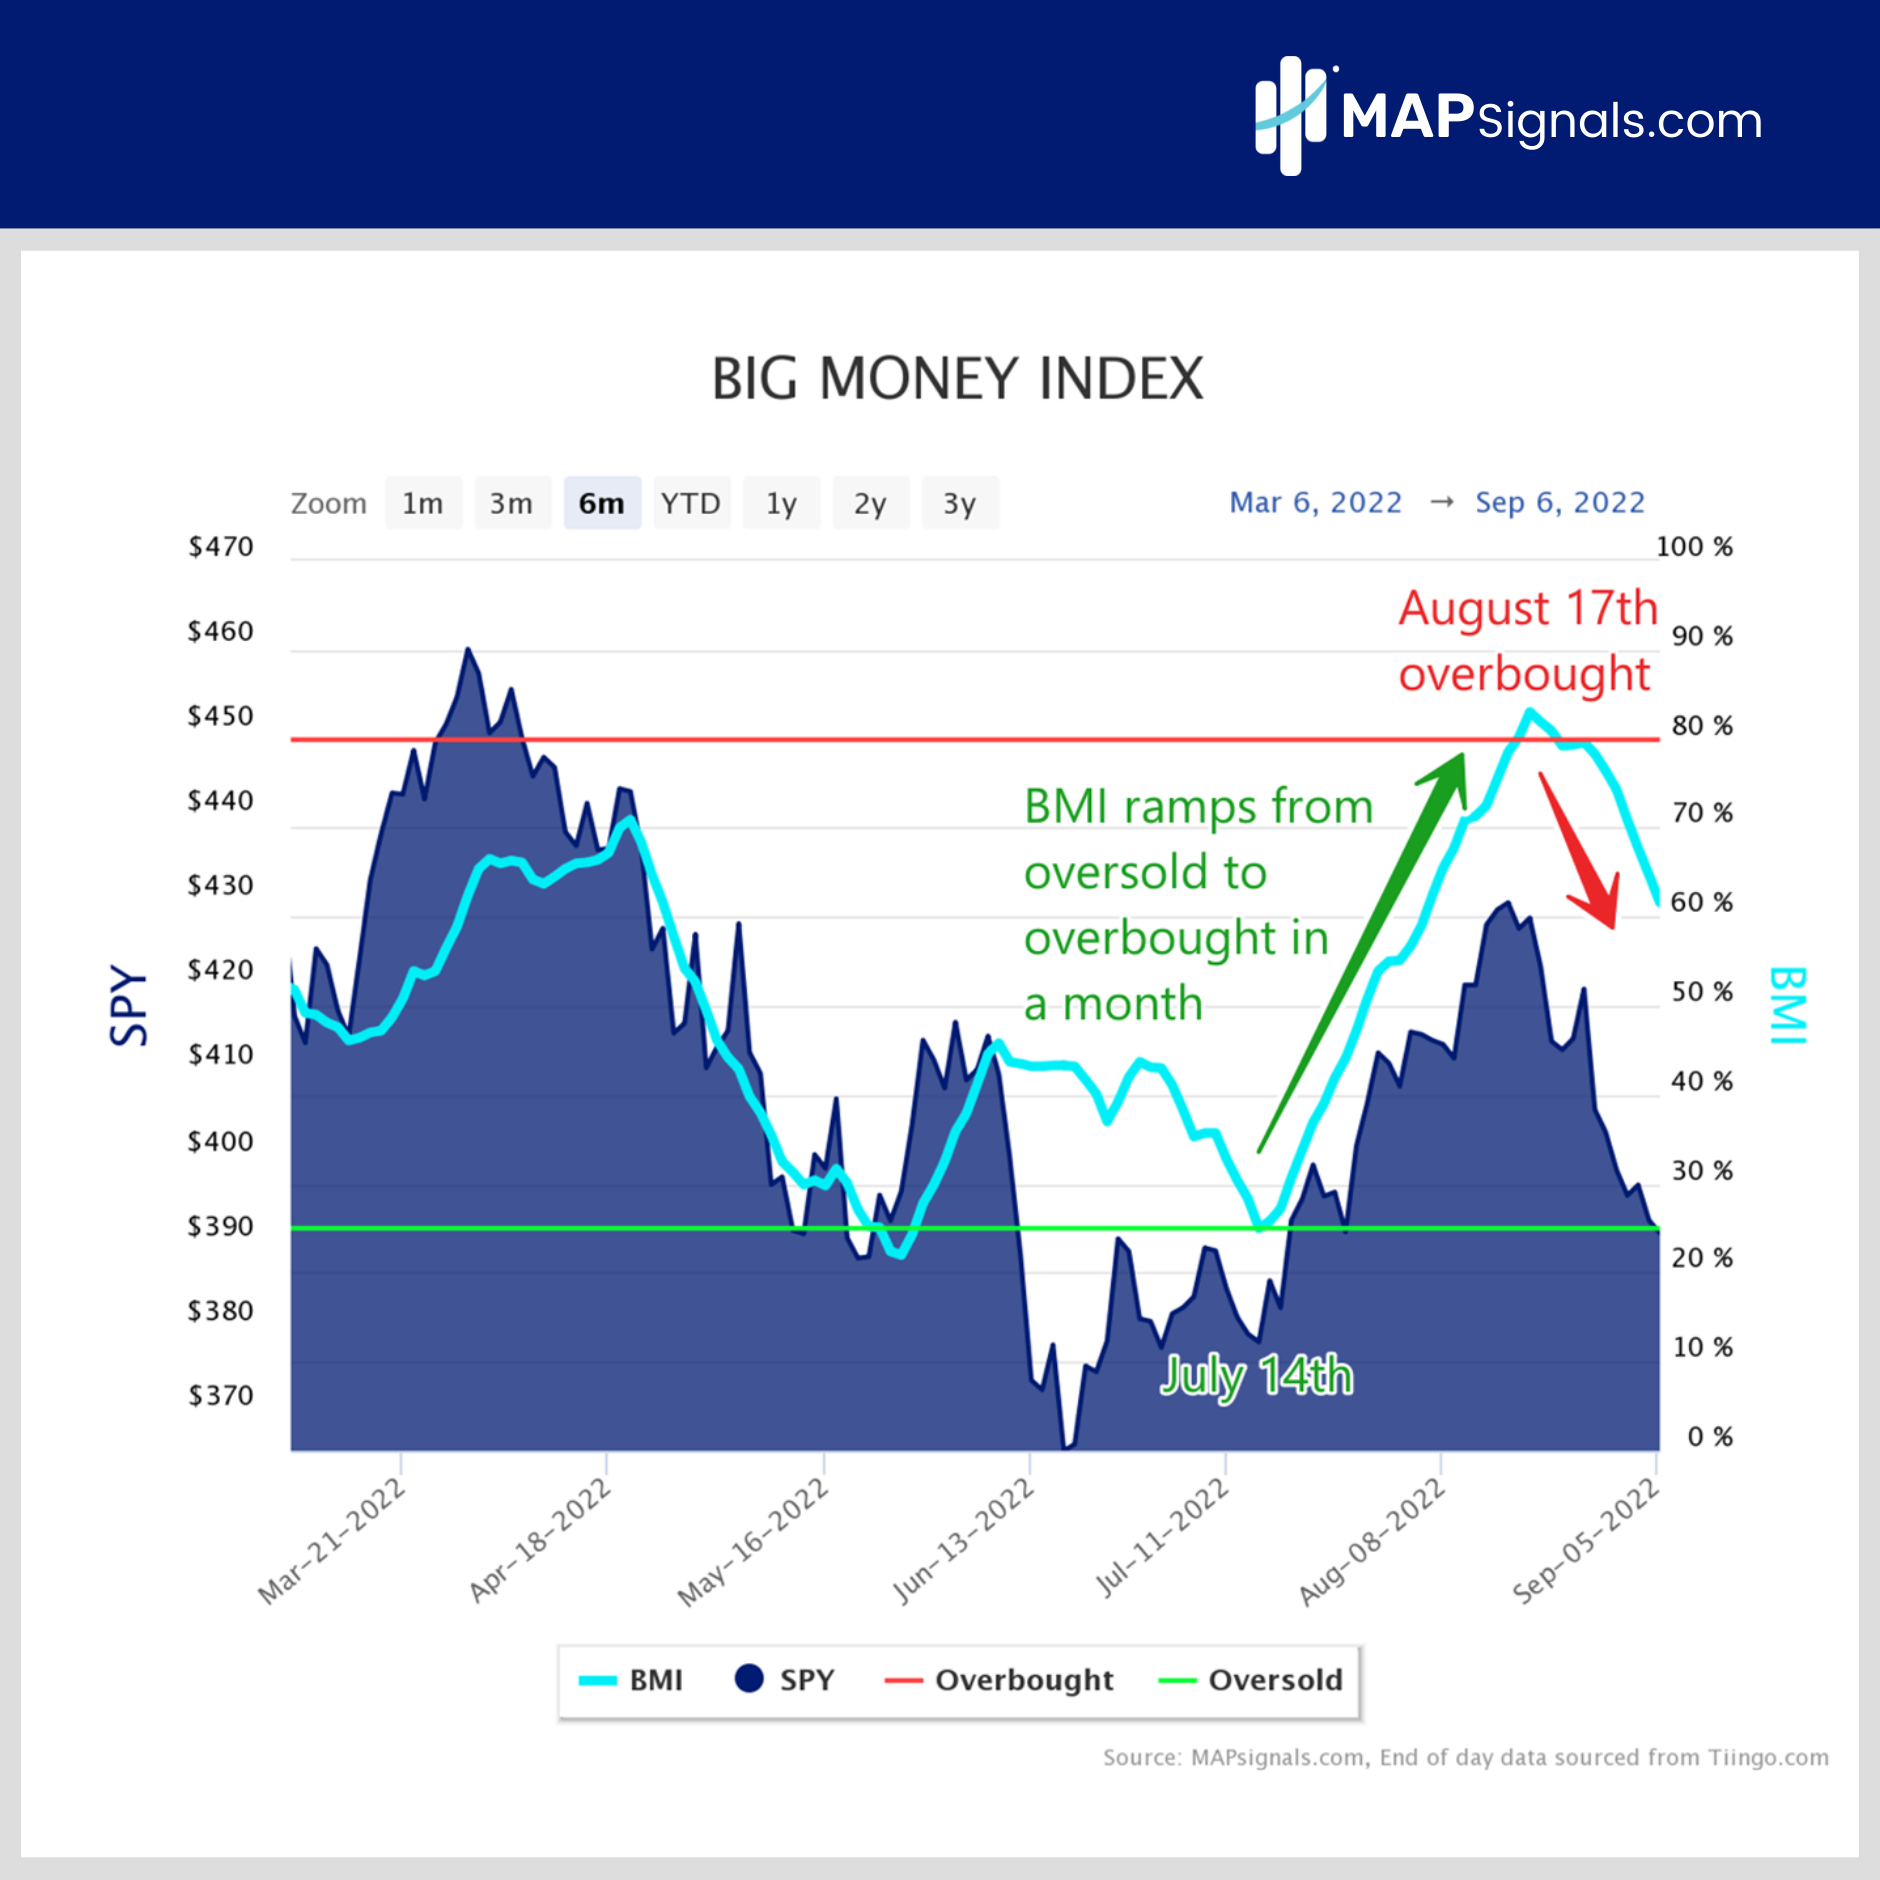 BMI ramps from oversold to overbought in a month | Big Money Index